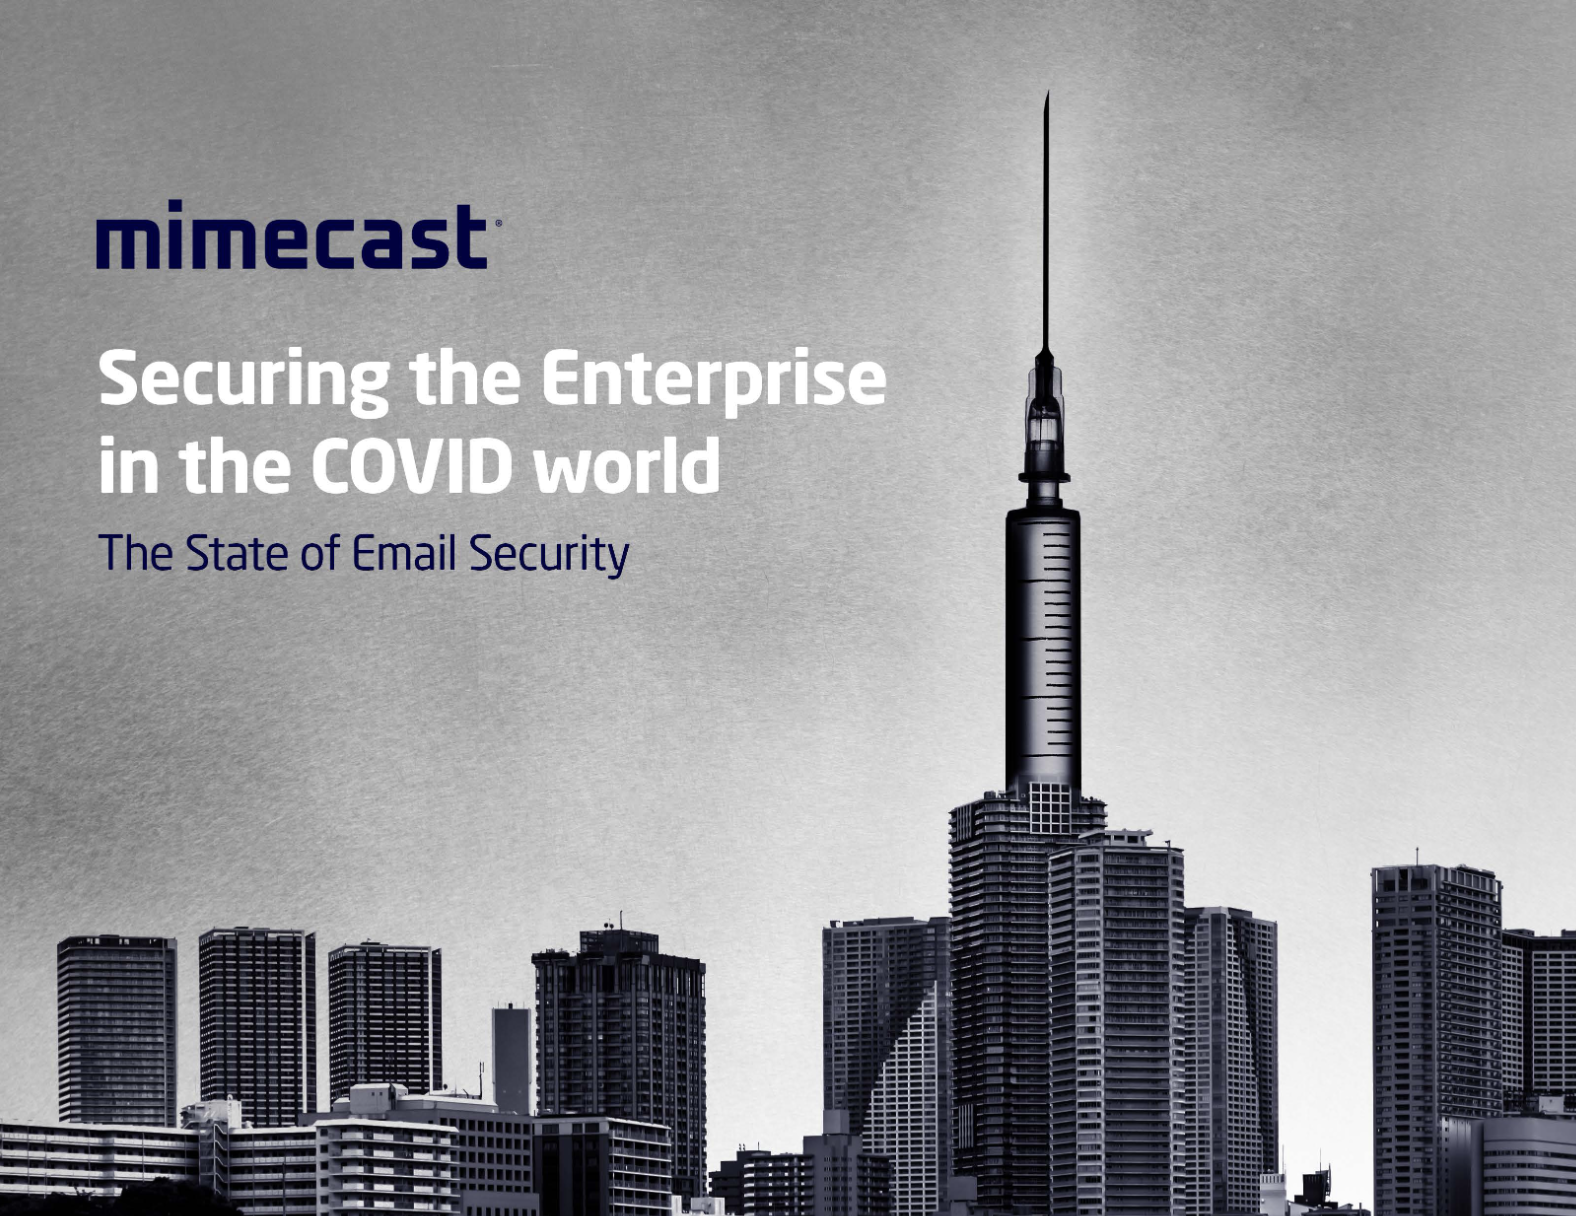 Mimecast’s State of Email Security 21 report